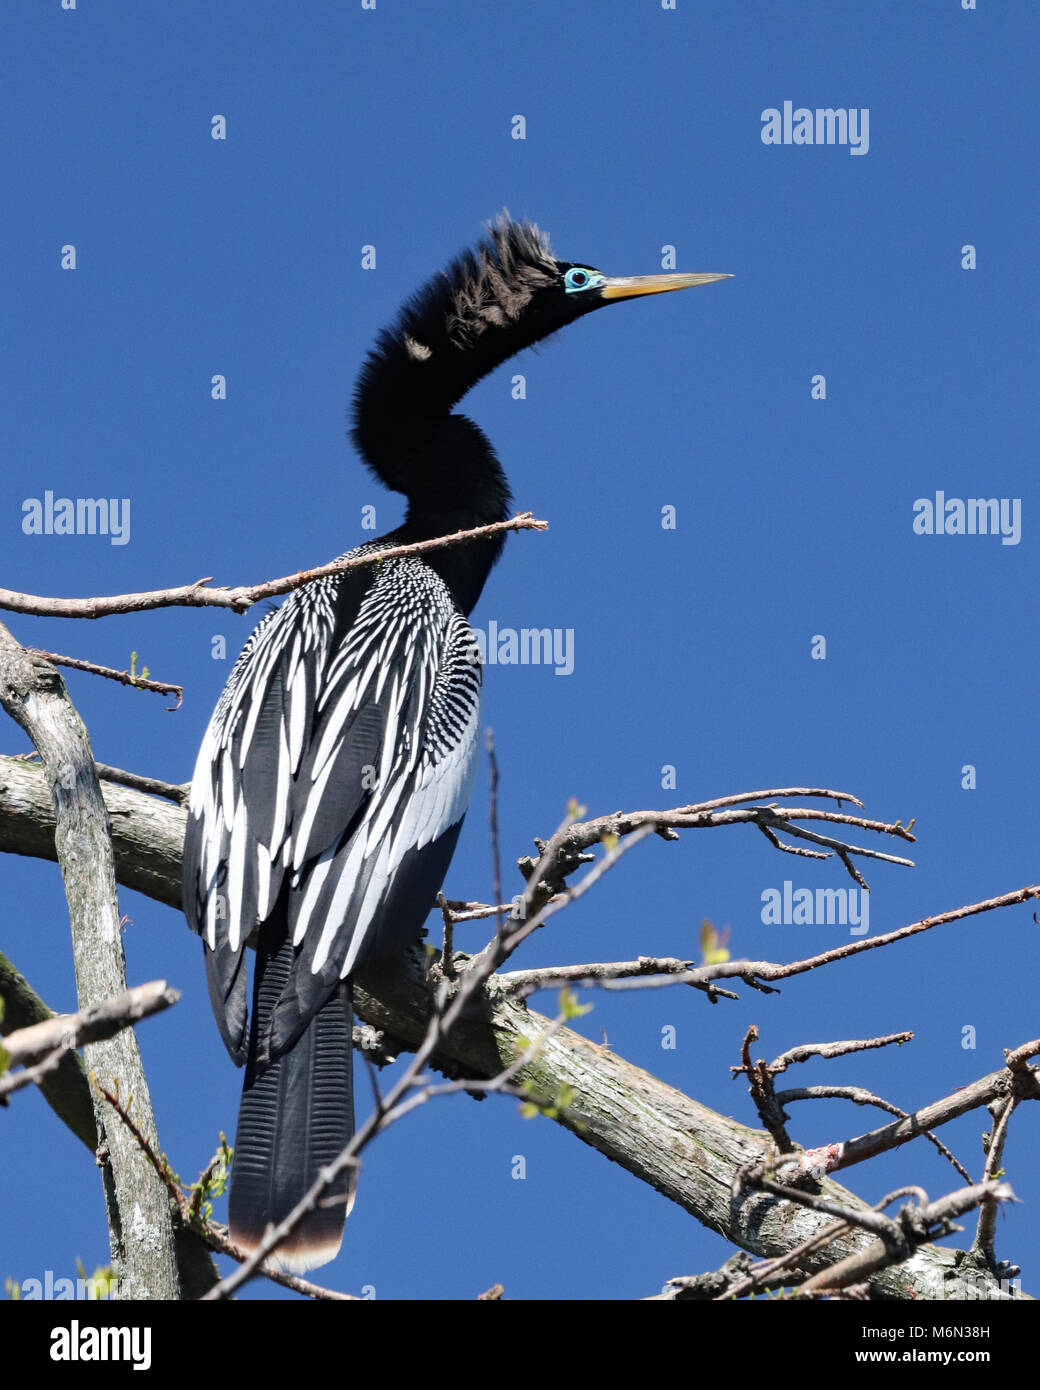 During breeding season, the male Anhinga develops a pretty green ring around it's eyes which really stands out against it's black head and long neck. Stock Photo